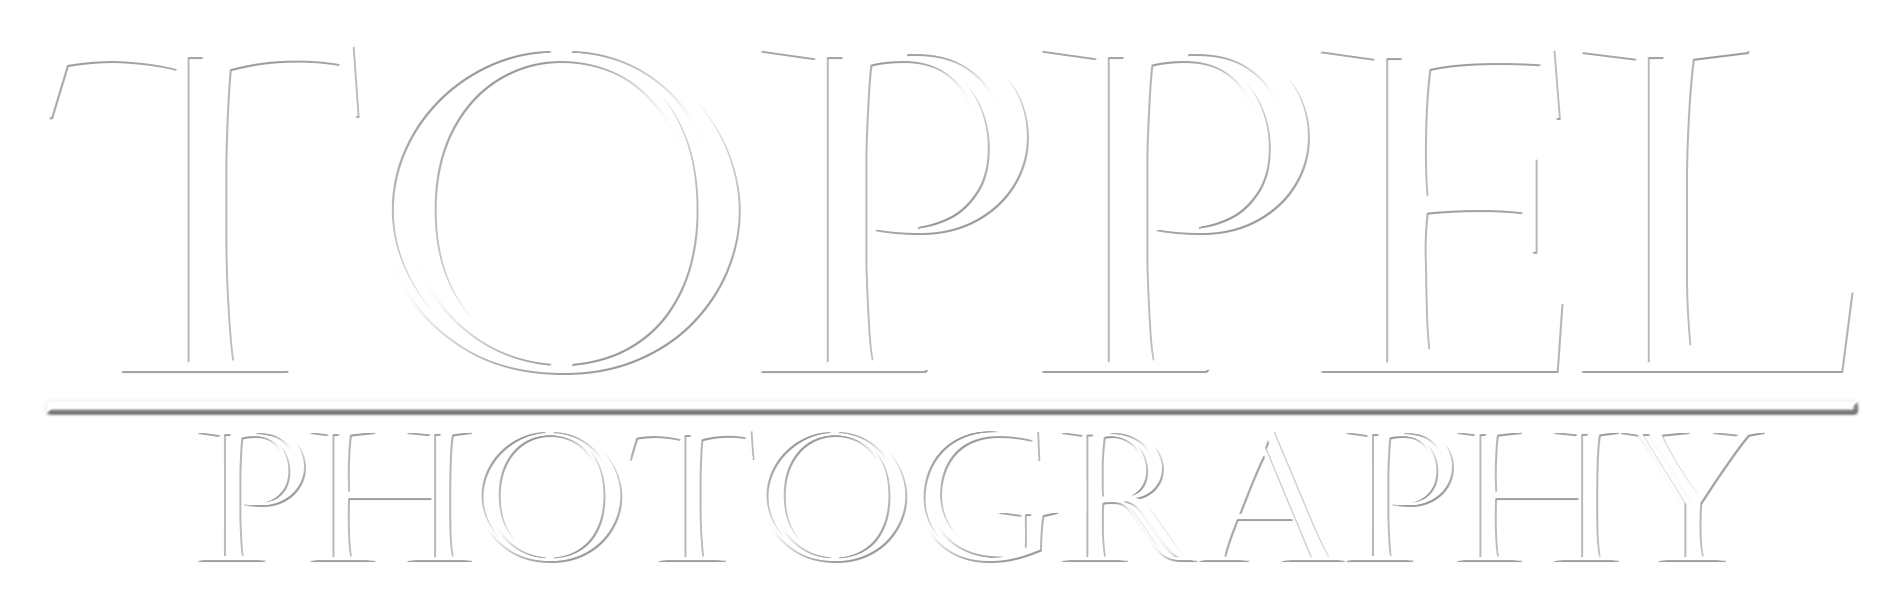 Toppel Photography: Exceptional photography for all of your special moments: Specializing in exceptional photography for every occasion: weddings, individual and family portraits, corporate/special events, community events.